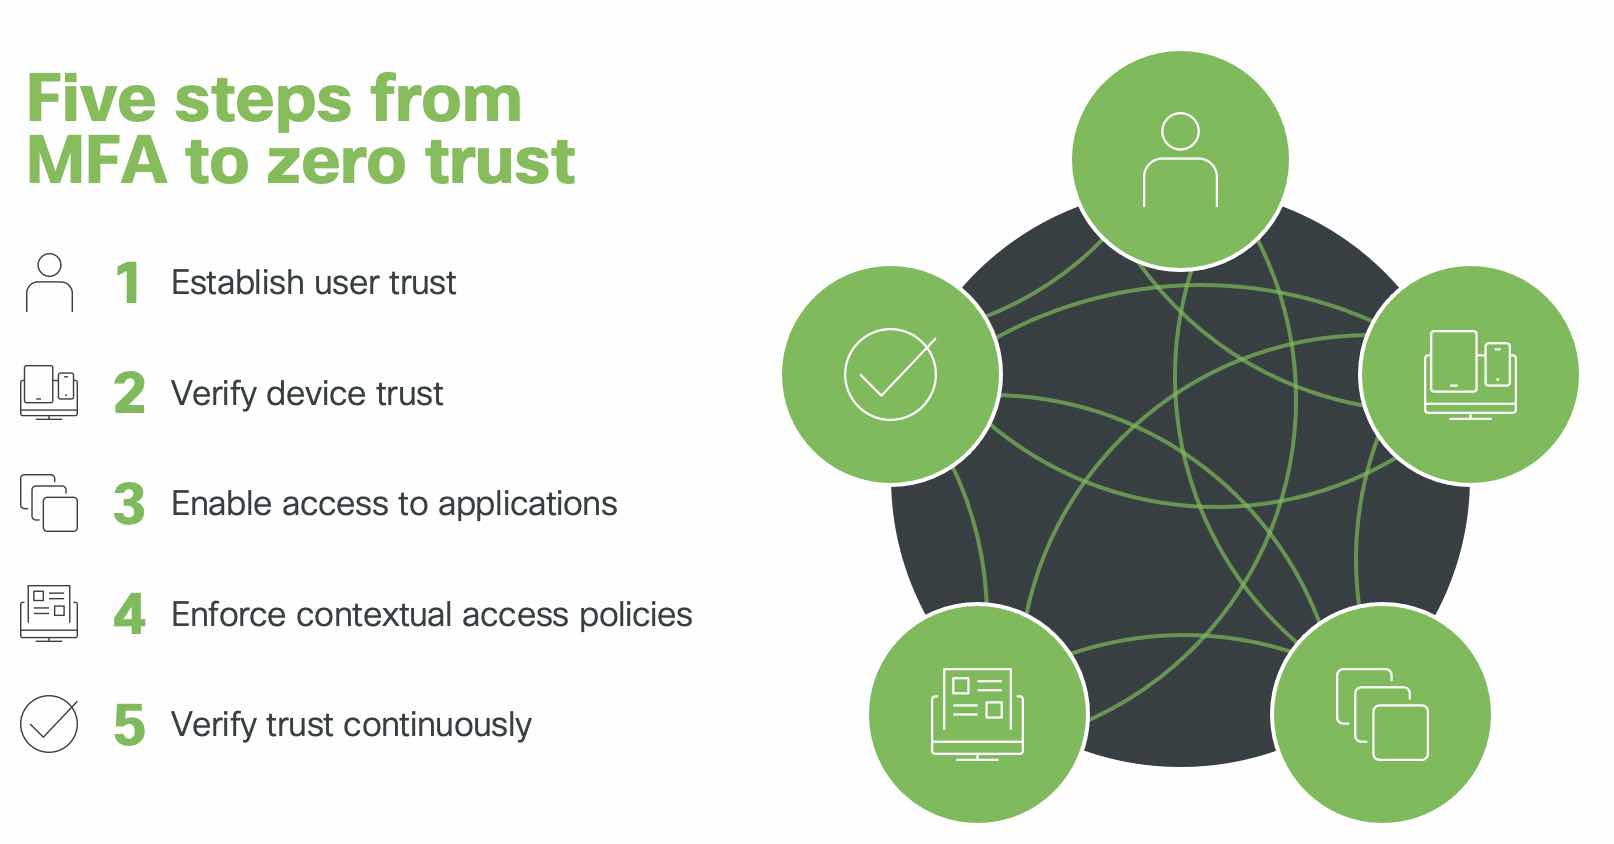 Graphic showing the five steps from MFA to zero trust: 1) Establish user trust 2) Verify device trust 3) Enable access to applications 4) Enforce contextual access policies 5) Verify trust continuously